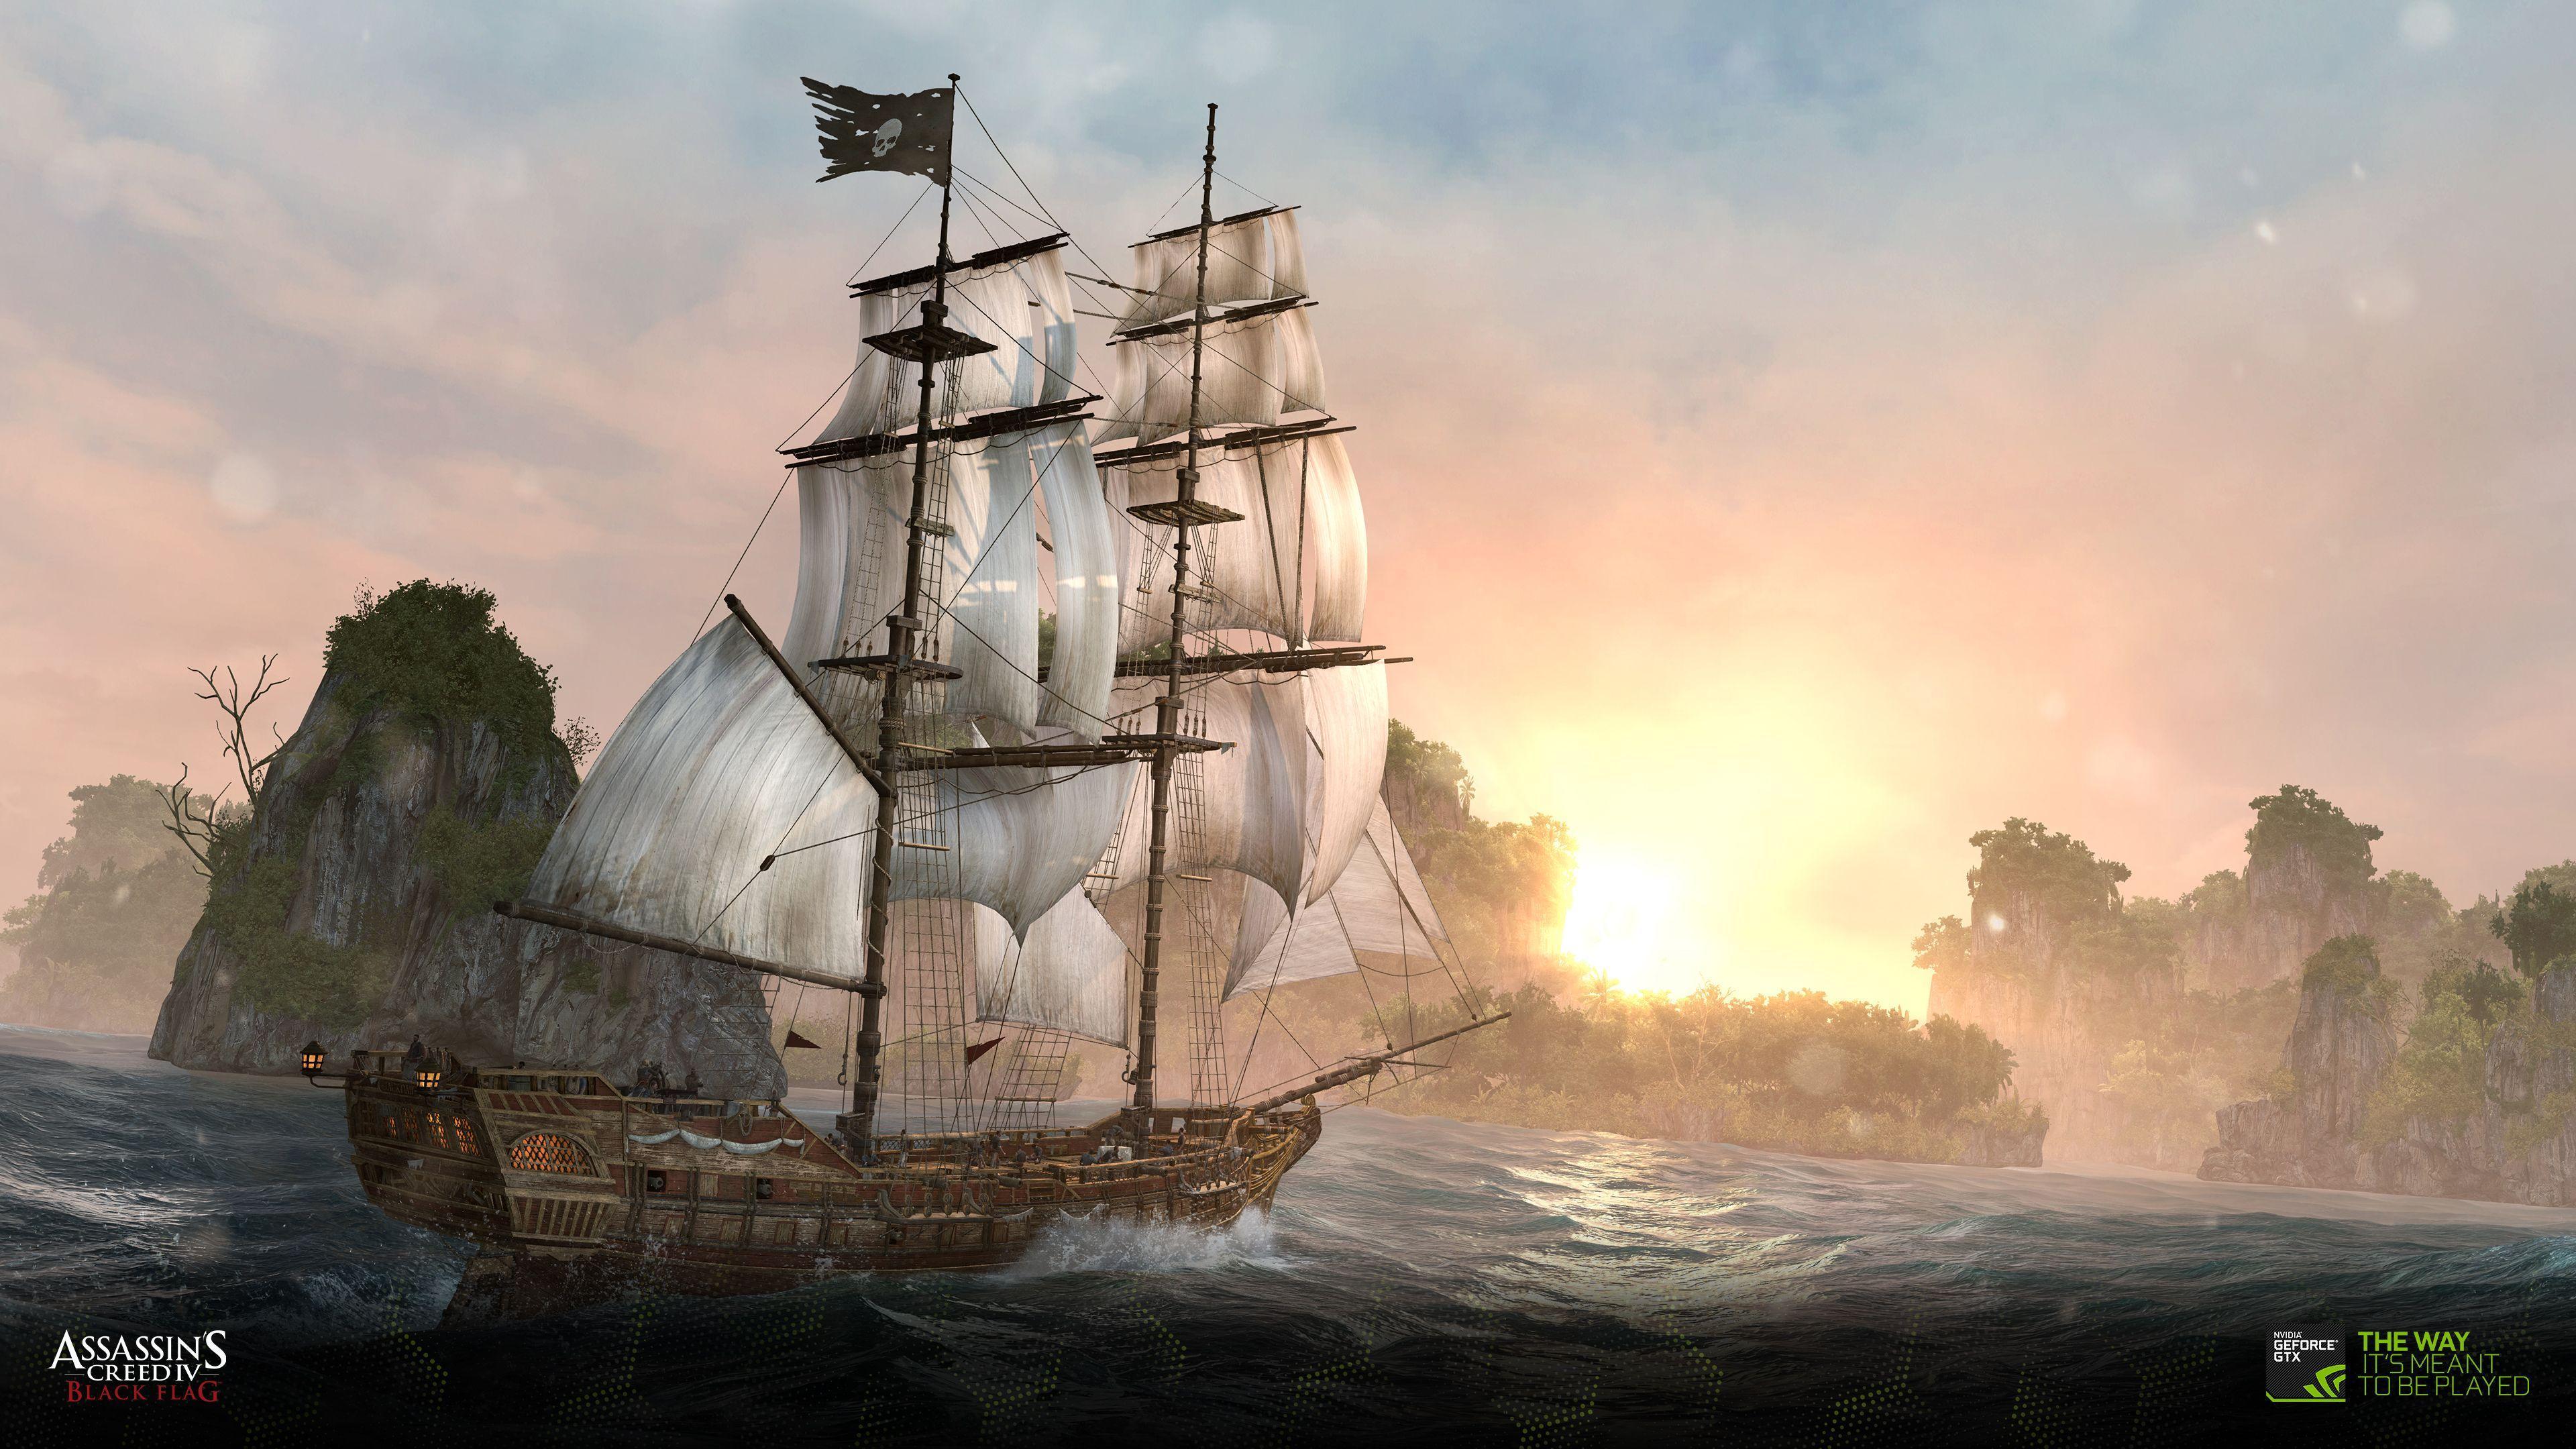 Download The Assassin's Creed IV Black Flag Wallpapers